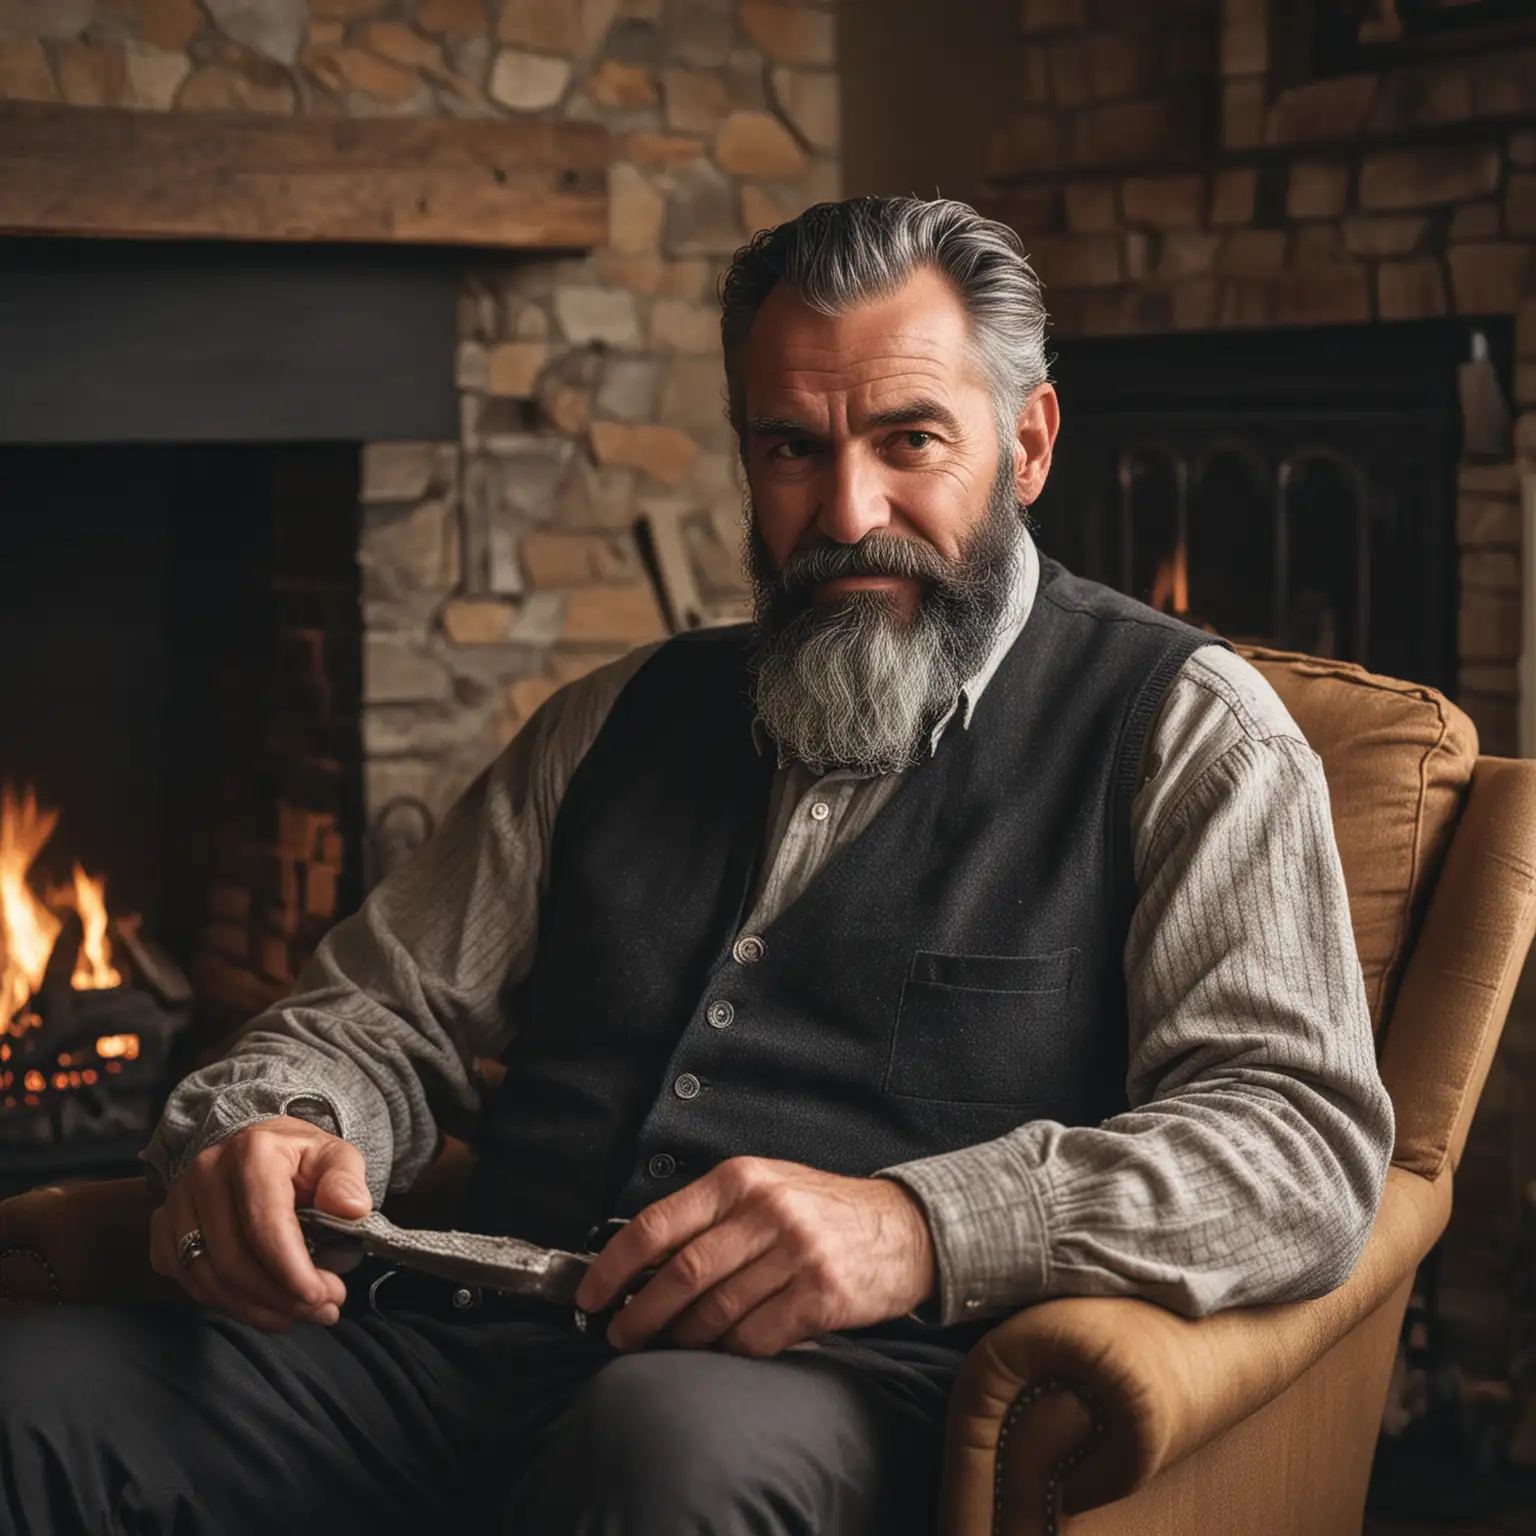 Middleaged Man Relaxing by Fireplace